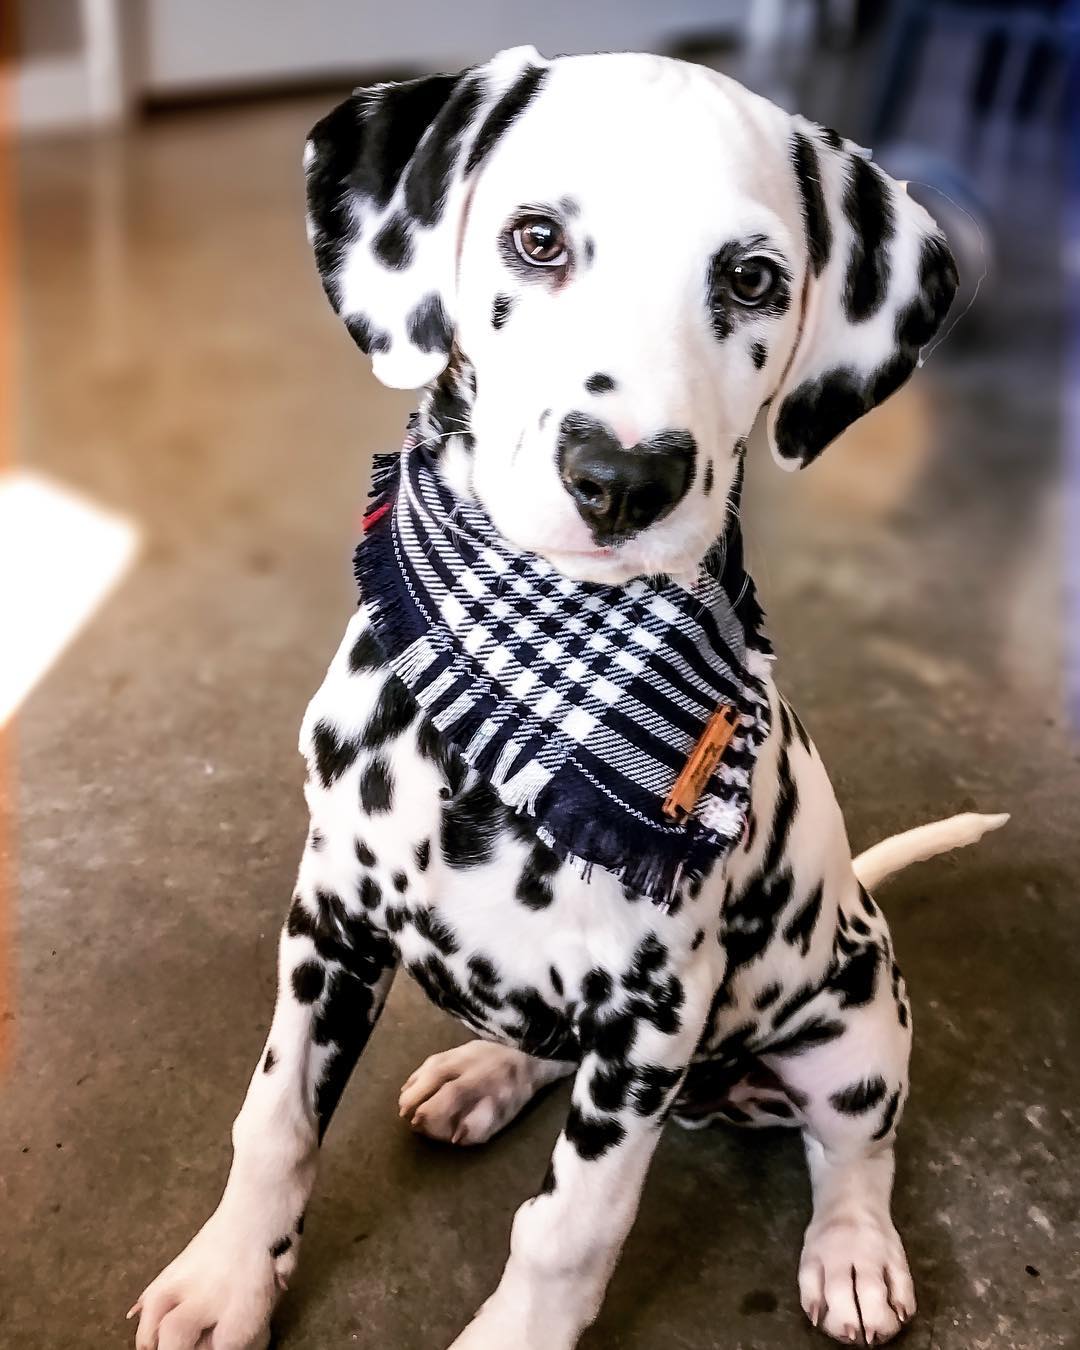 Meet Wiley, The Dalmatian Puppy With A Heart-Shaped Nose The Internet